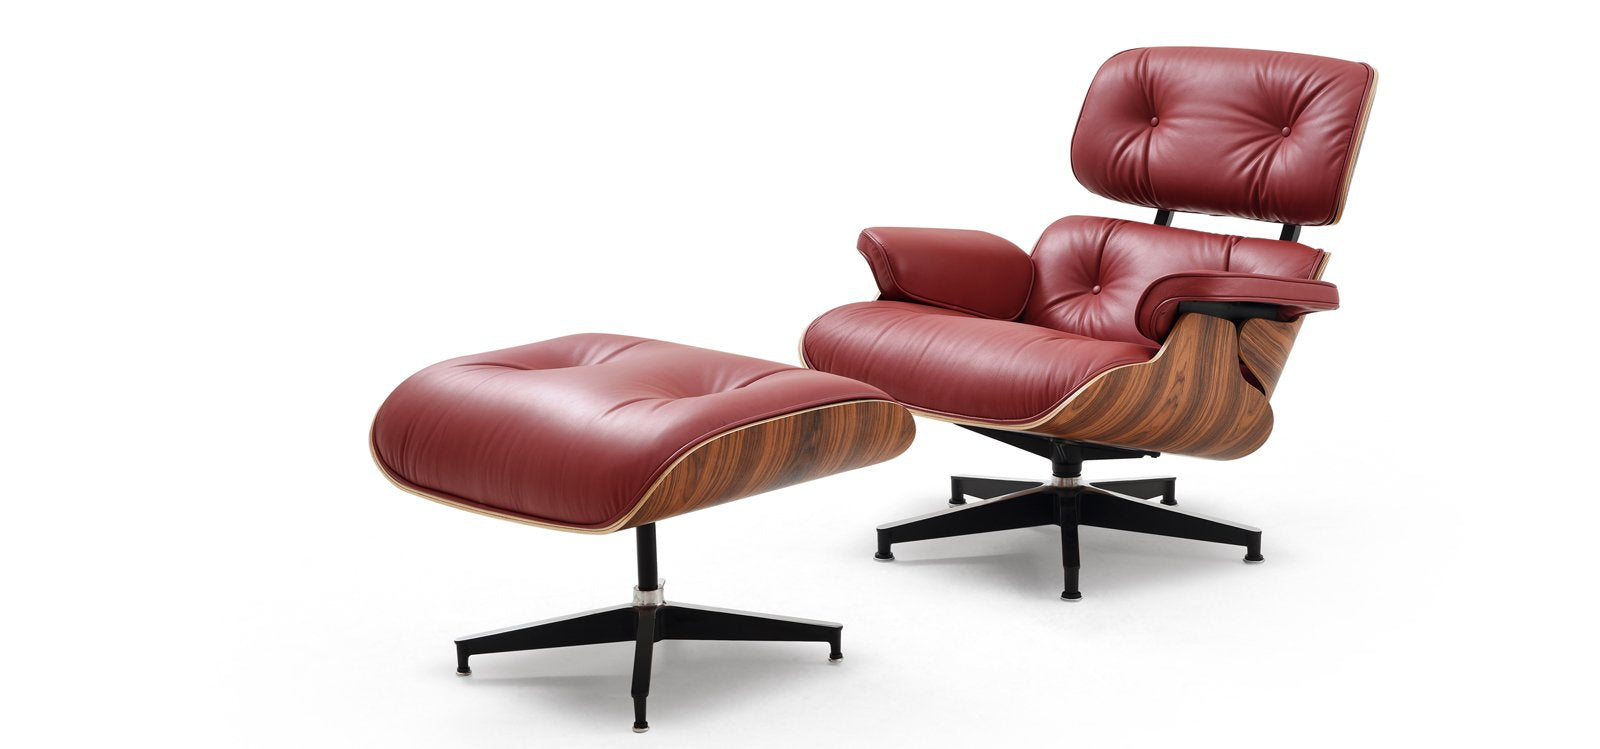 eames chair replica, best eames replica, tall eames replica, eames lounge chair replica, eames style chair, Mid-century eames modern replica, Eames-inspired furniture, Eames replica furniture, Affordable Eames reproductions, Iconic design chair replicas